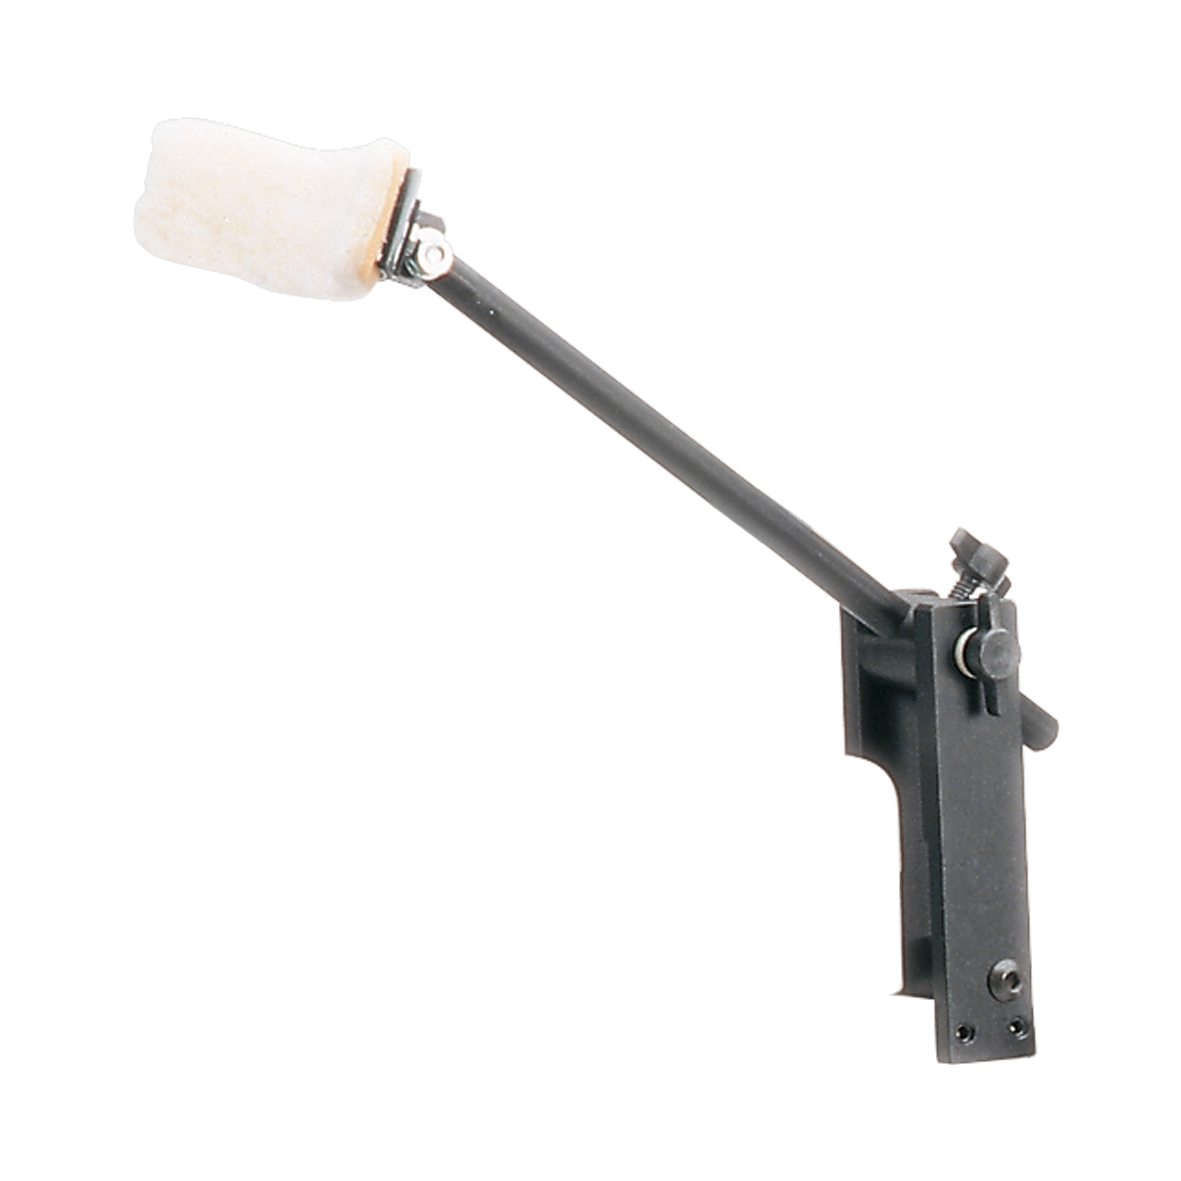 GRS headrest for all GRS microscope stands